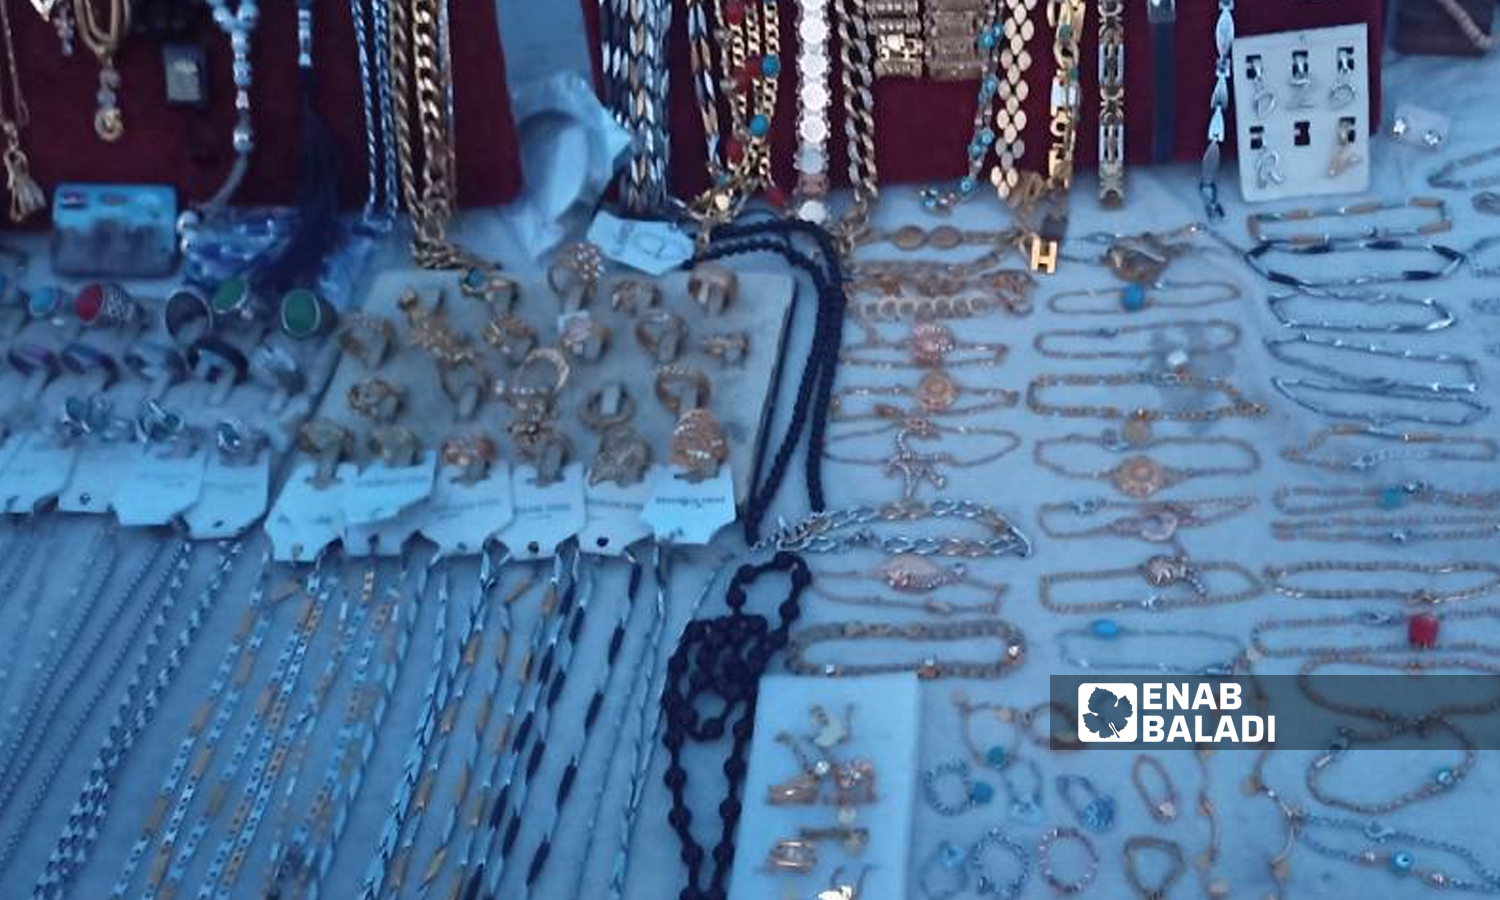 A stall for selling accessories in the Old City of Aleppo, northern Syria - 24 March 2022 (Enab Baladi / Saber al-Halabi)